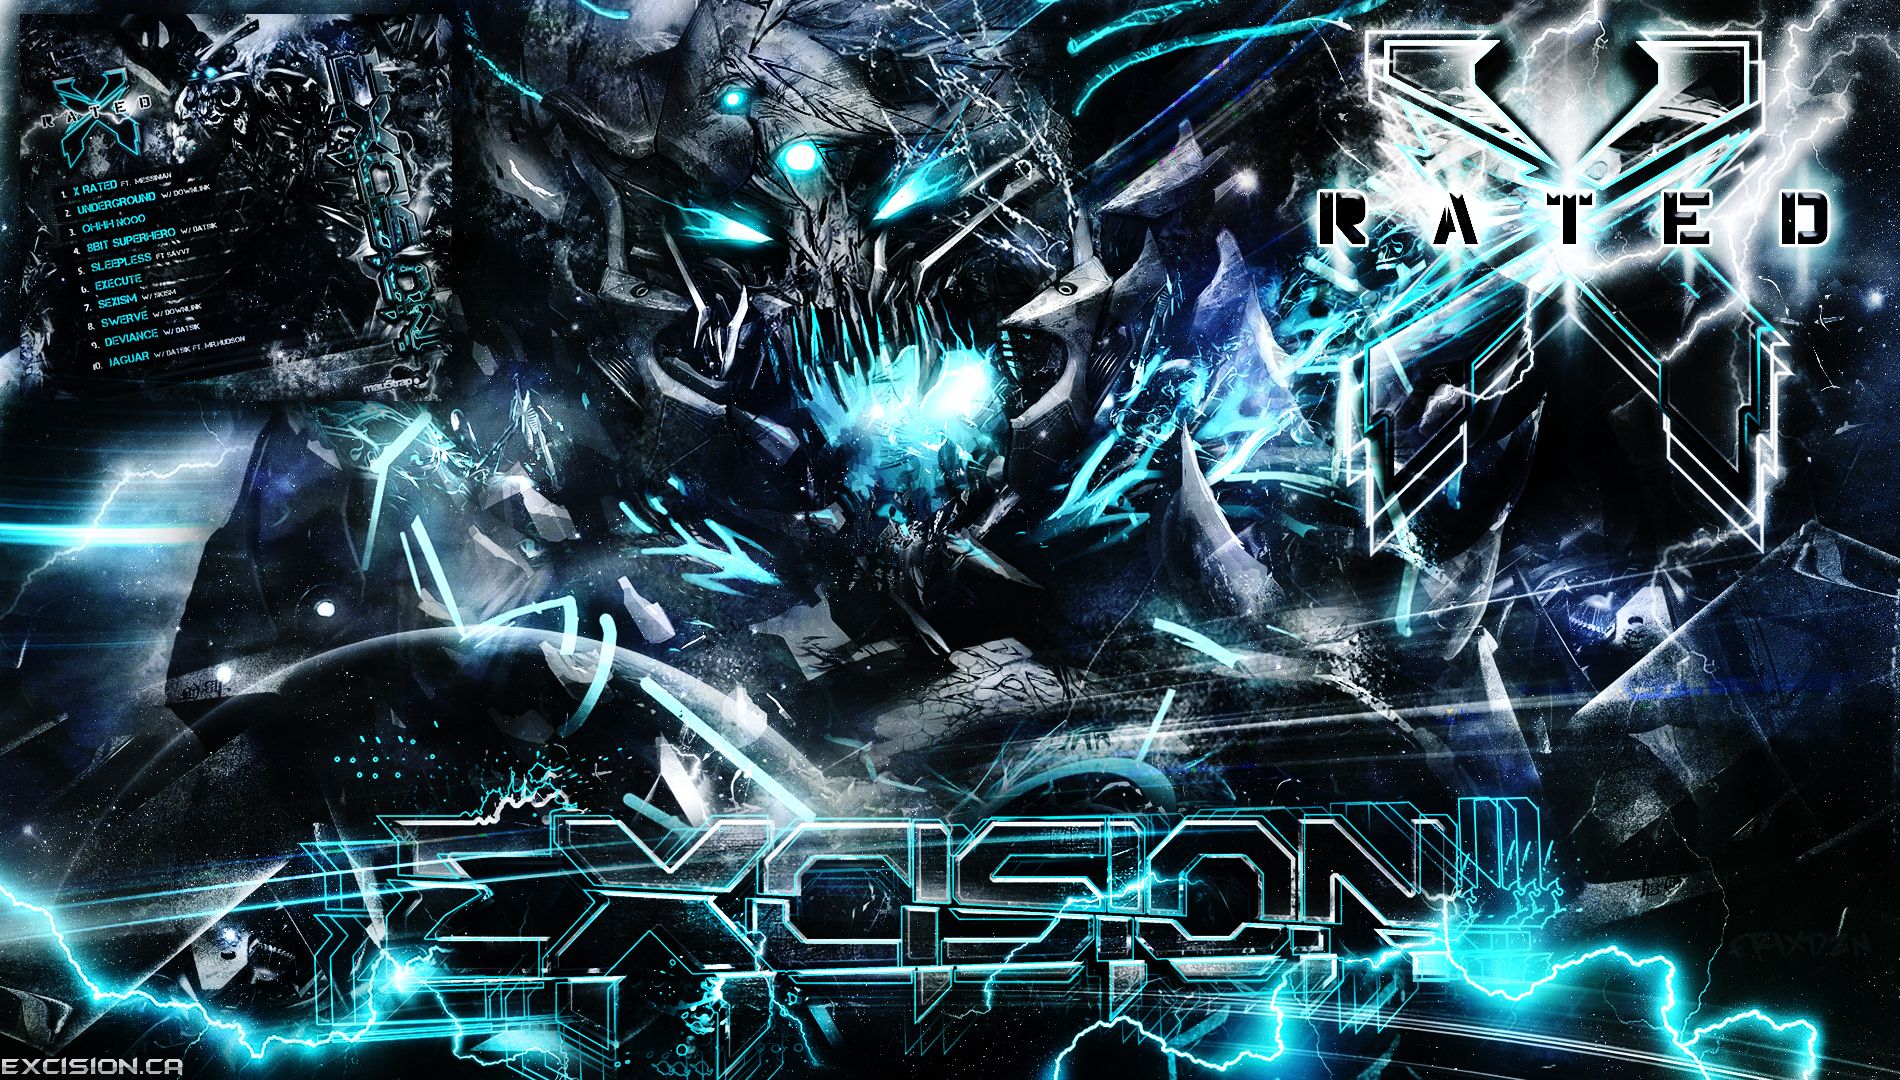 Excision wallpapers, Music, HQ Excision pictures.